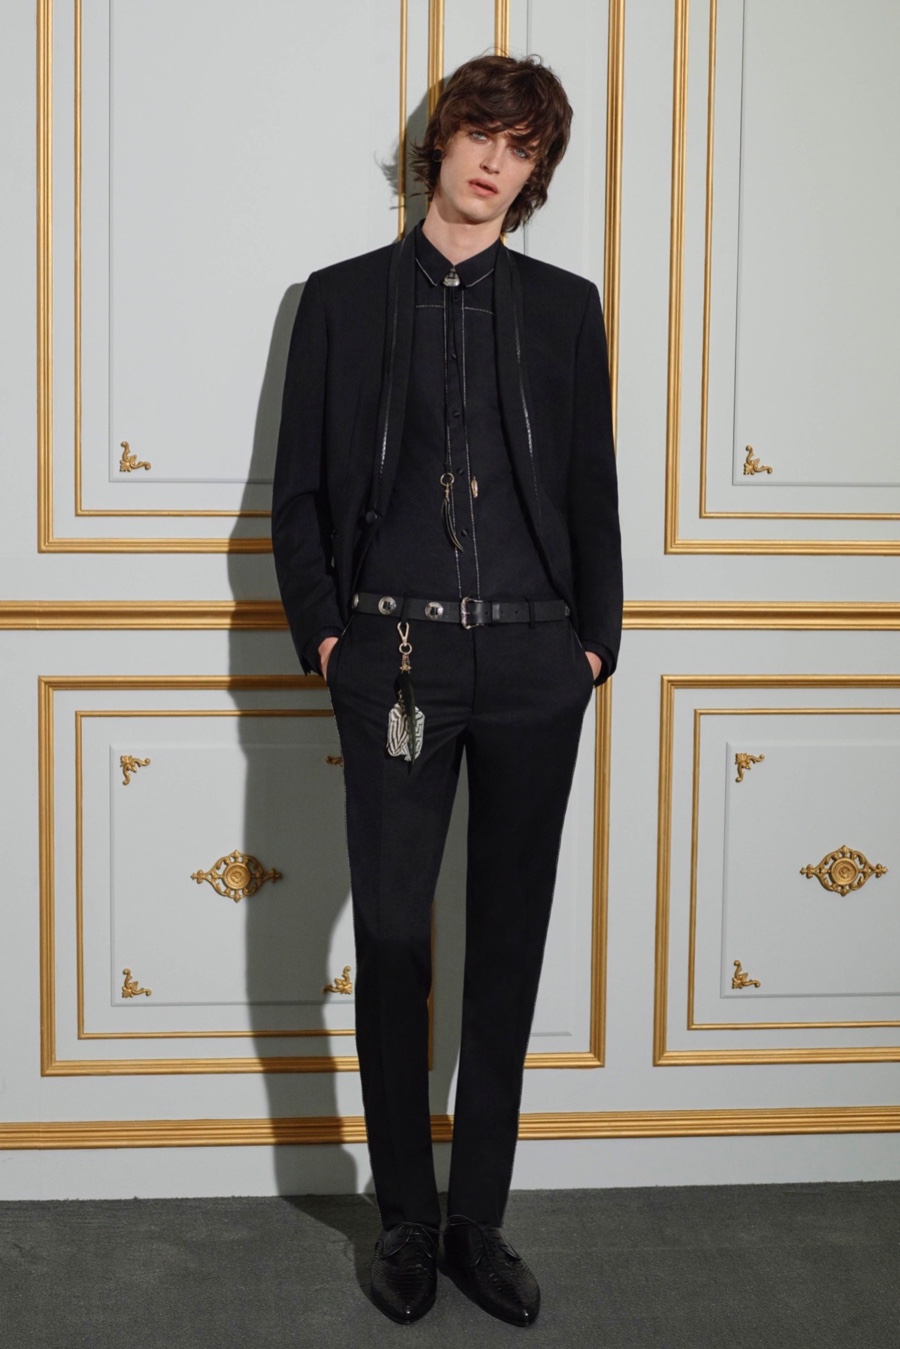 Roberto Cavalli Spring/Summer 2016 Menswear Collection Delivers Glam Rock Styles